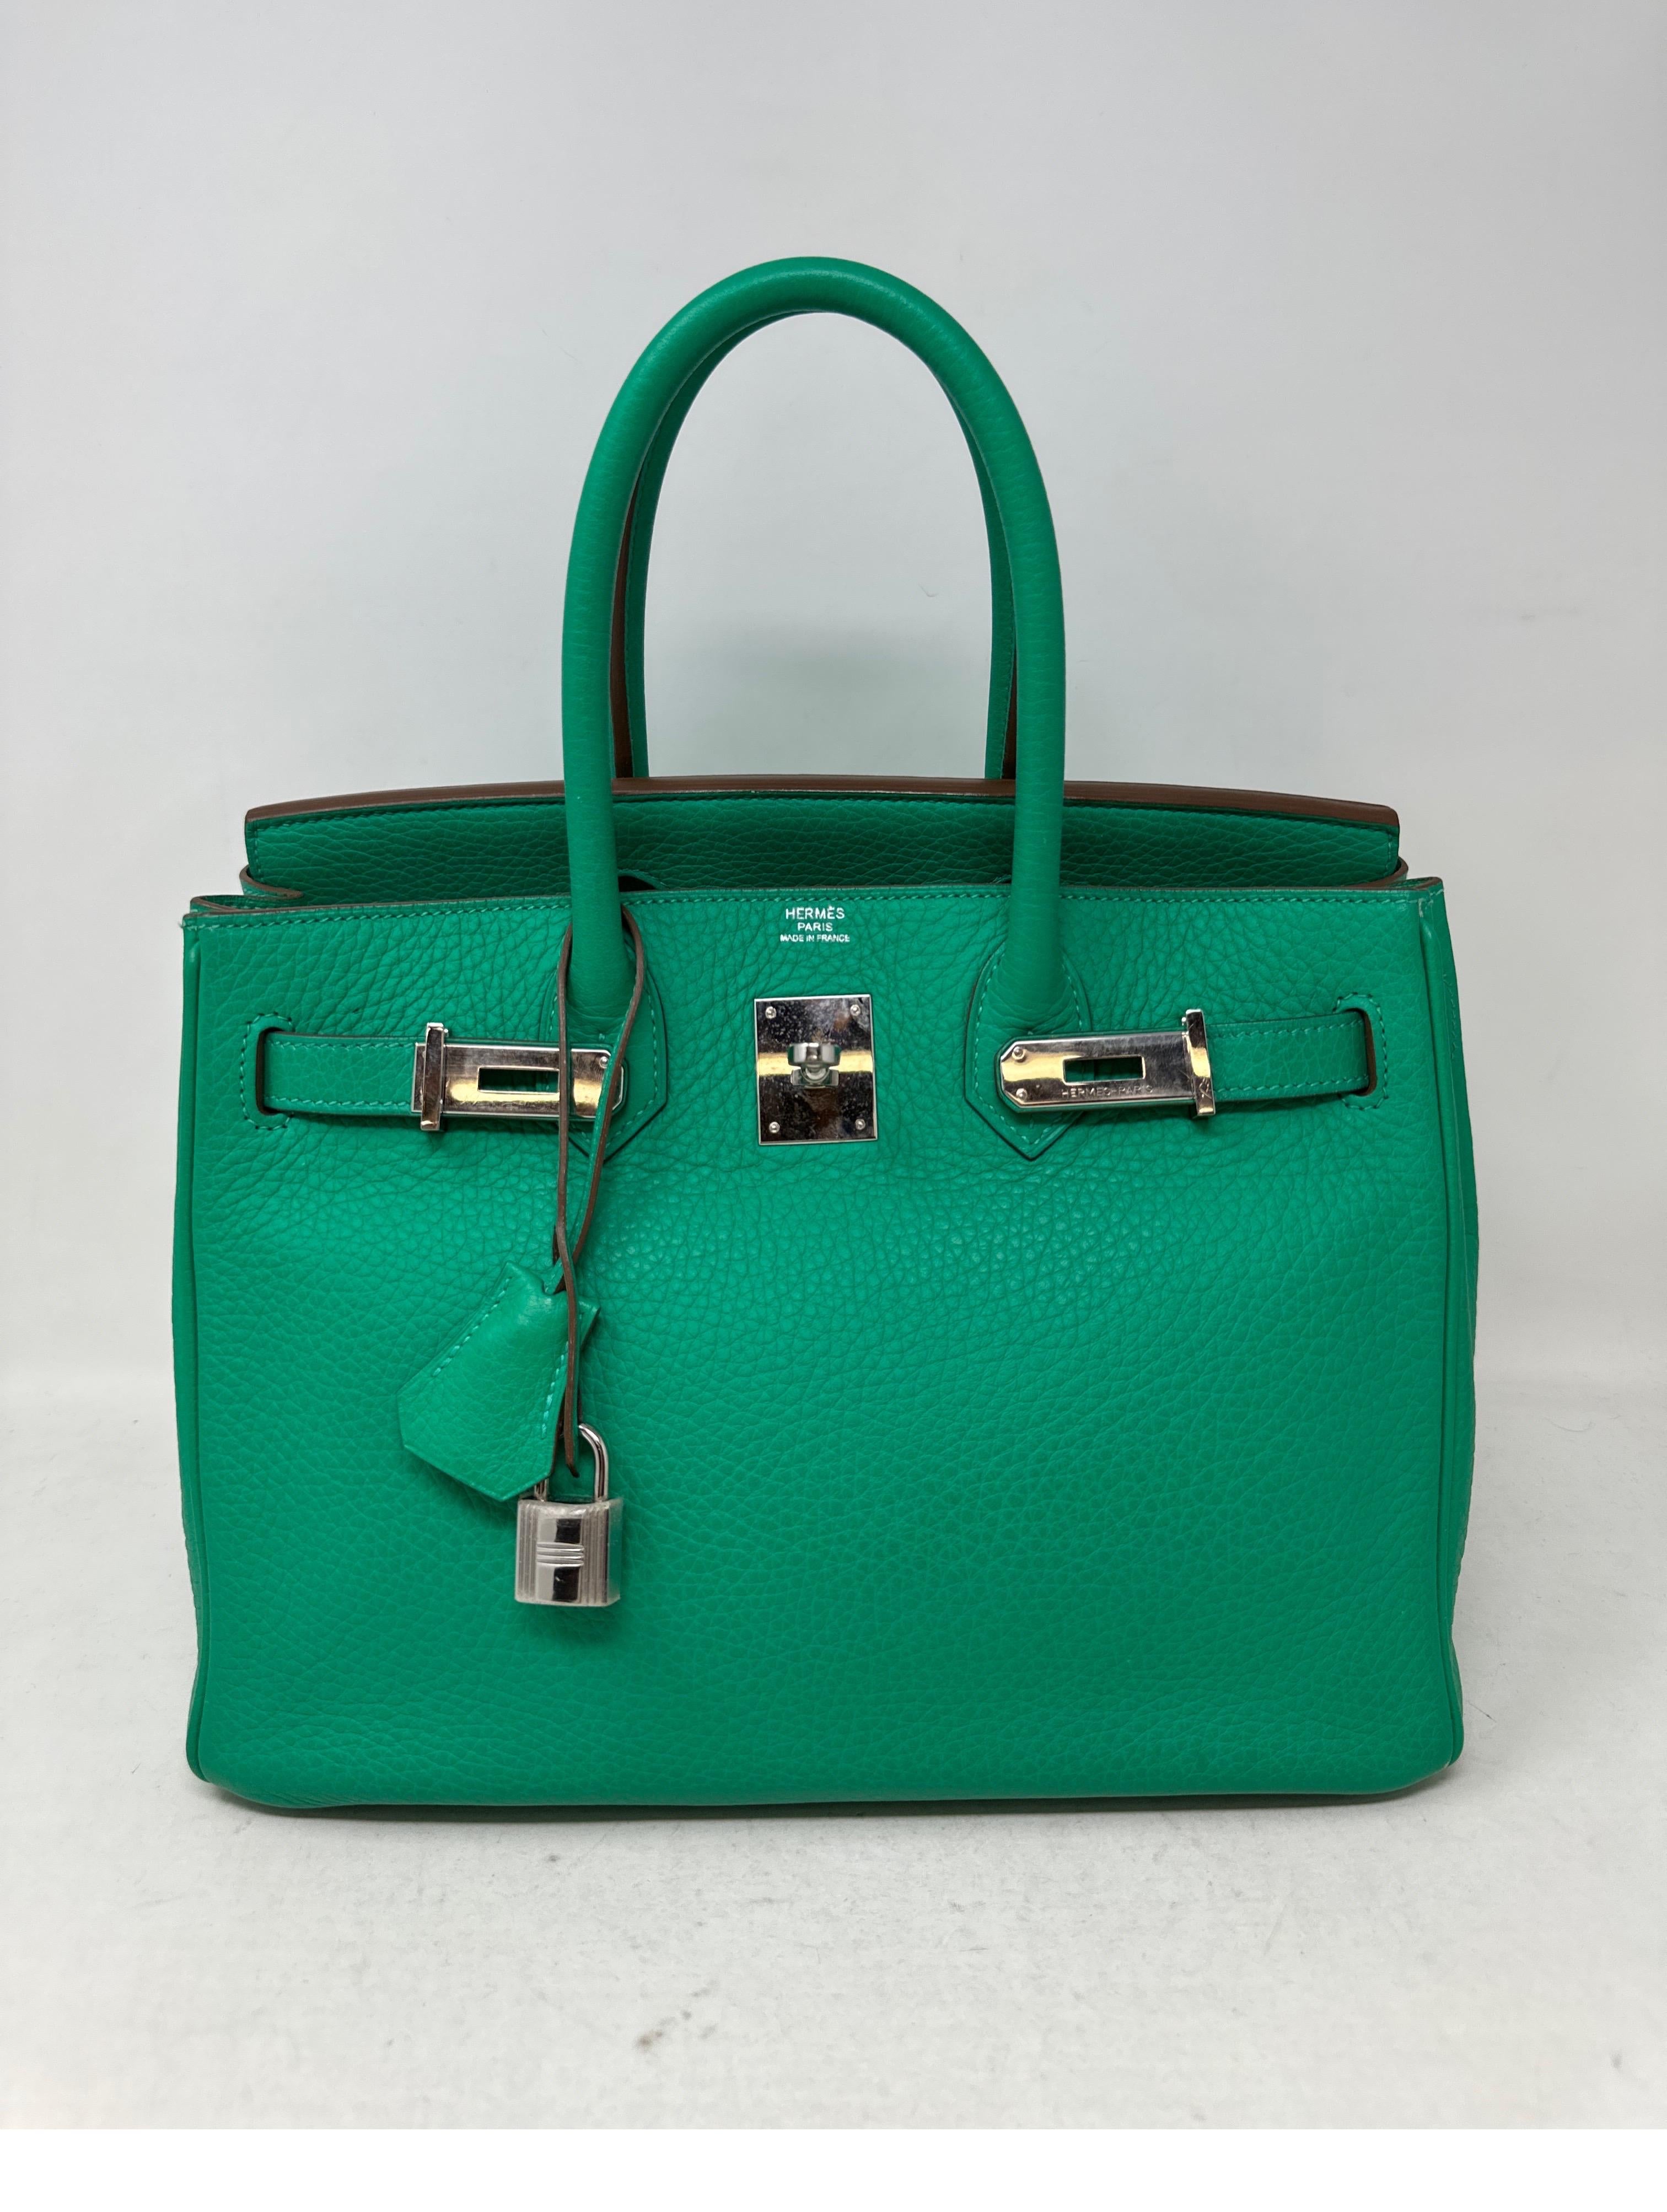 Hermes Menthe Birkin 30 Bag. Minty green color with palladium silver hardware. Very good condition. Plastic still on the hardware. Interior clean. Clemence leather. Most wanted size 30 and unique green color. Includes clochette, lock, keys, and dust